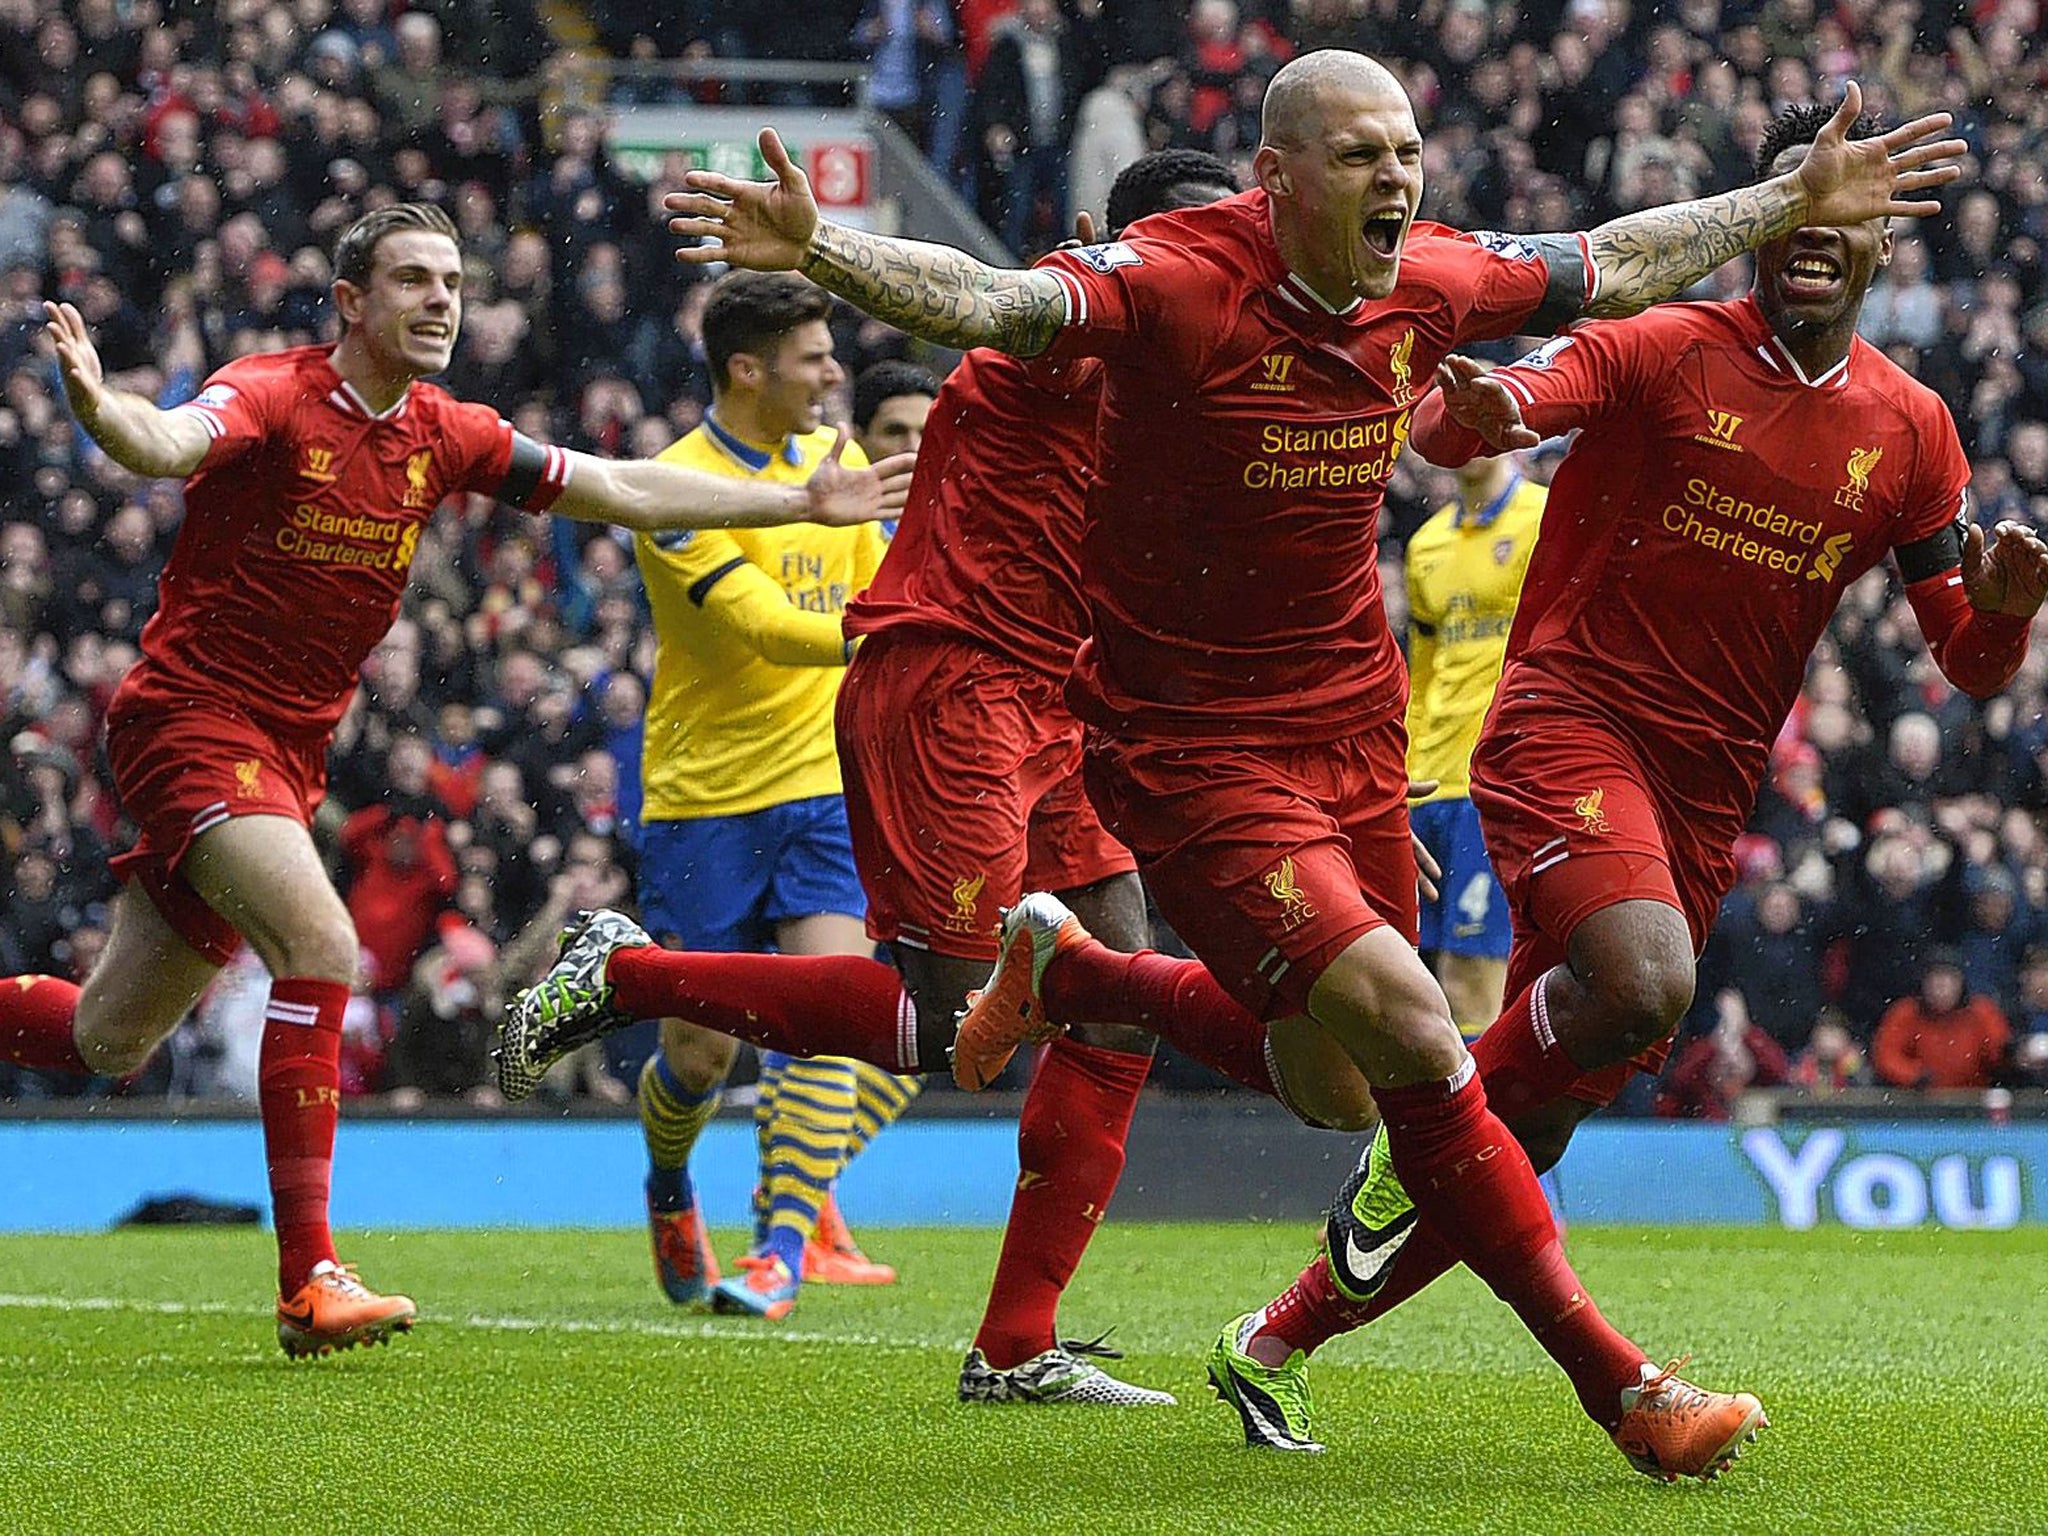 Martin Skrtel gets Liverpool off and running with a goal after just 53 seconds